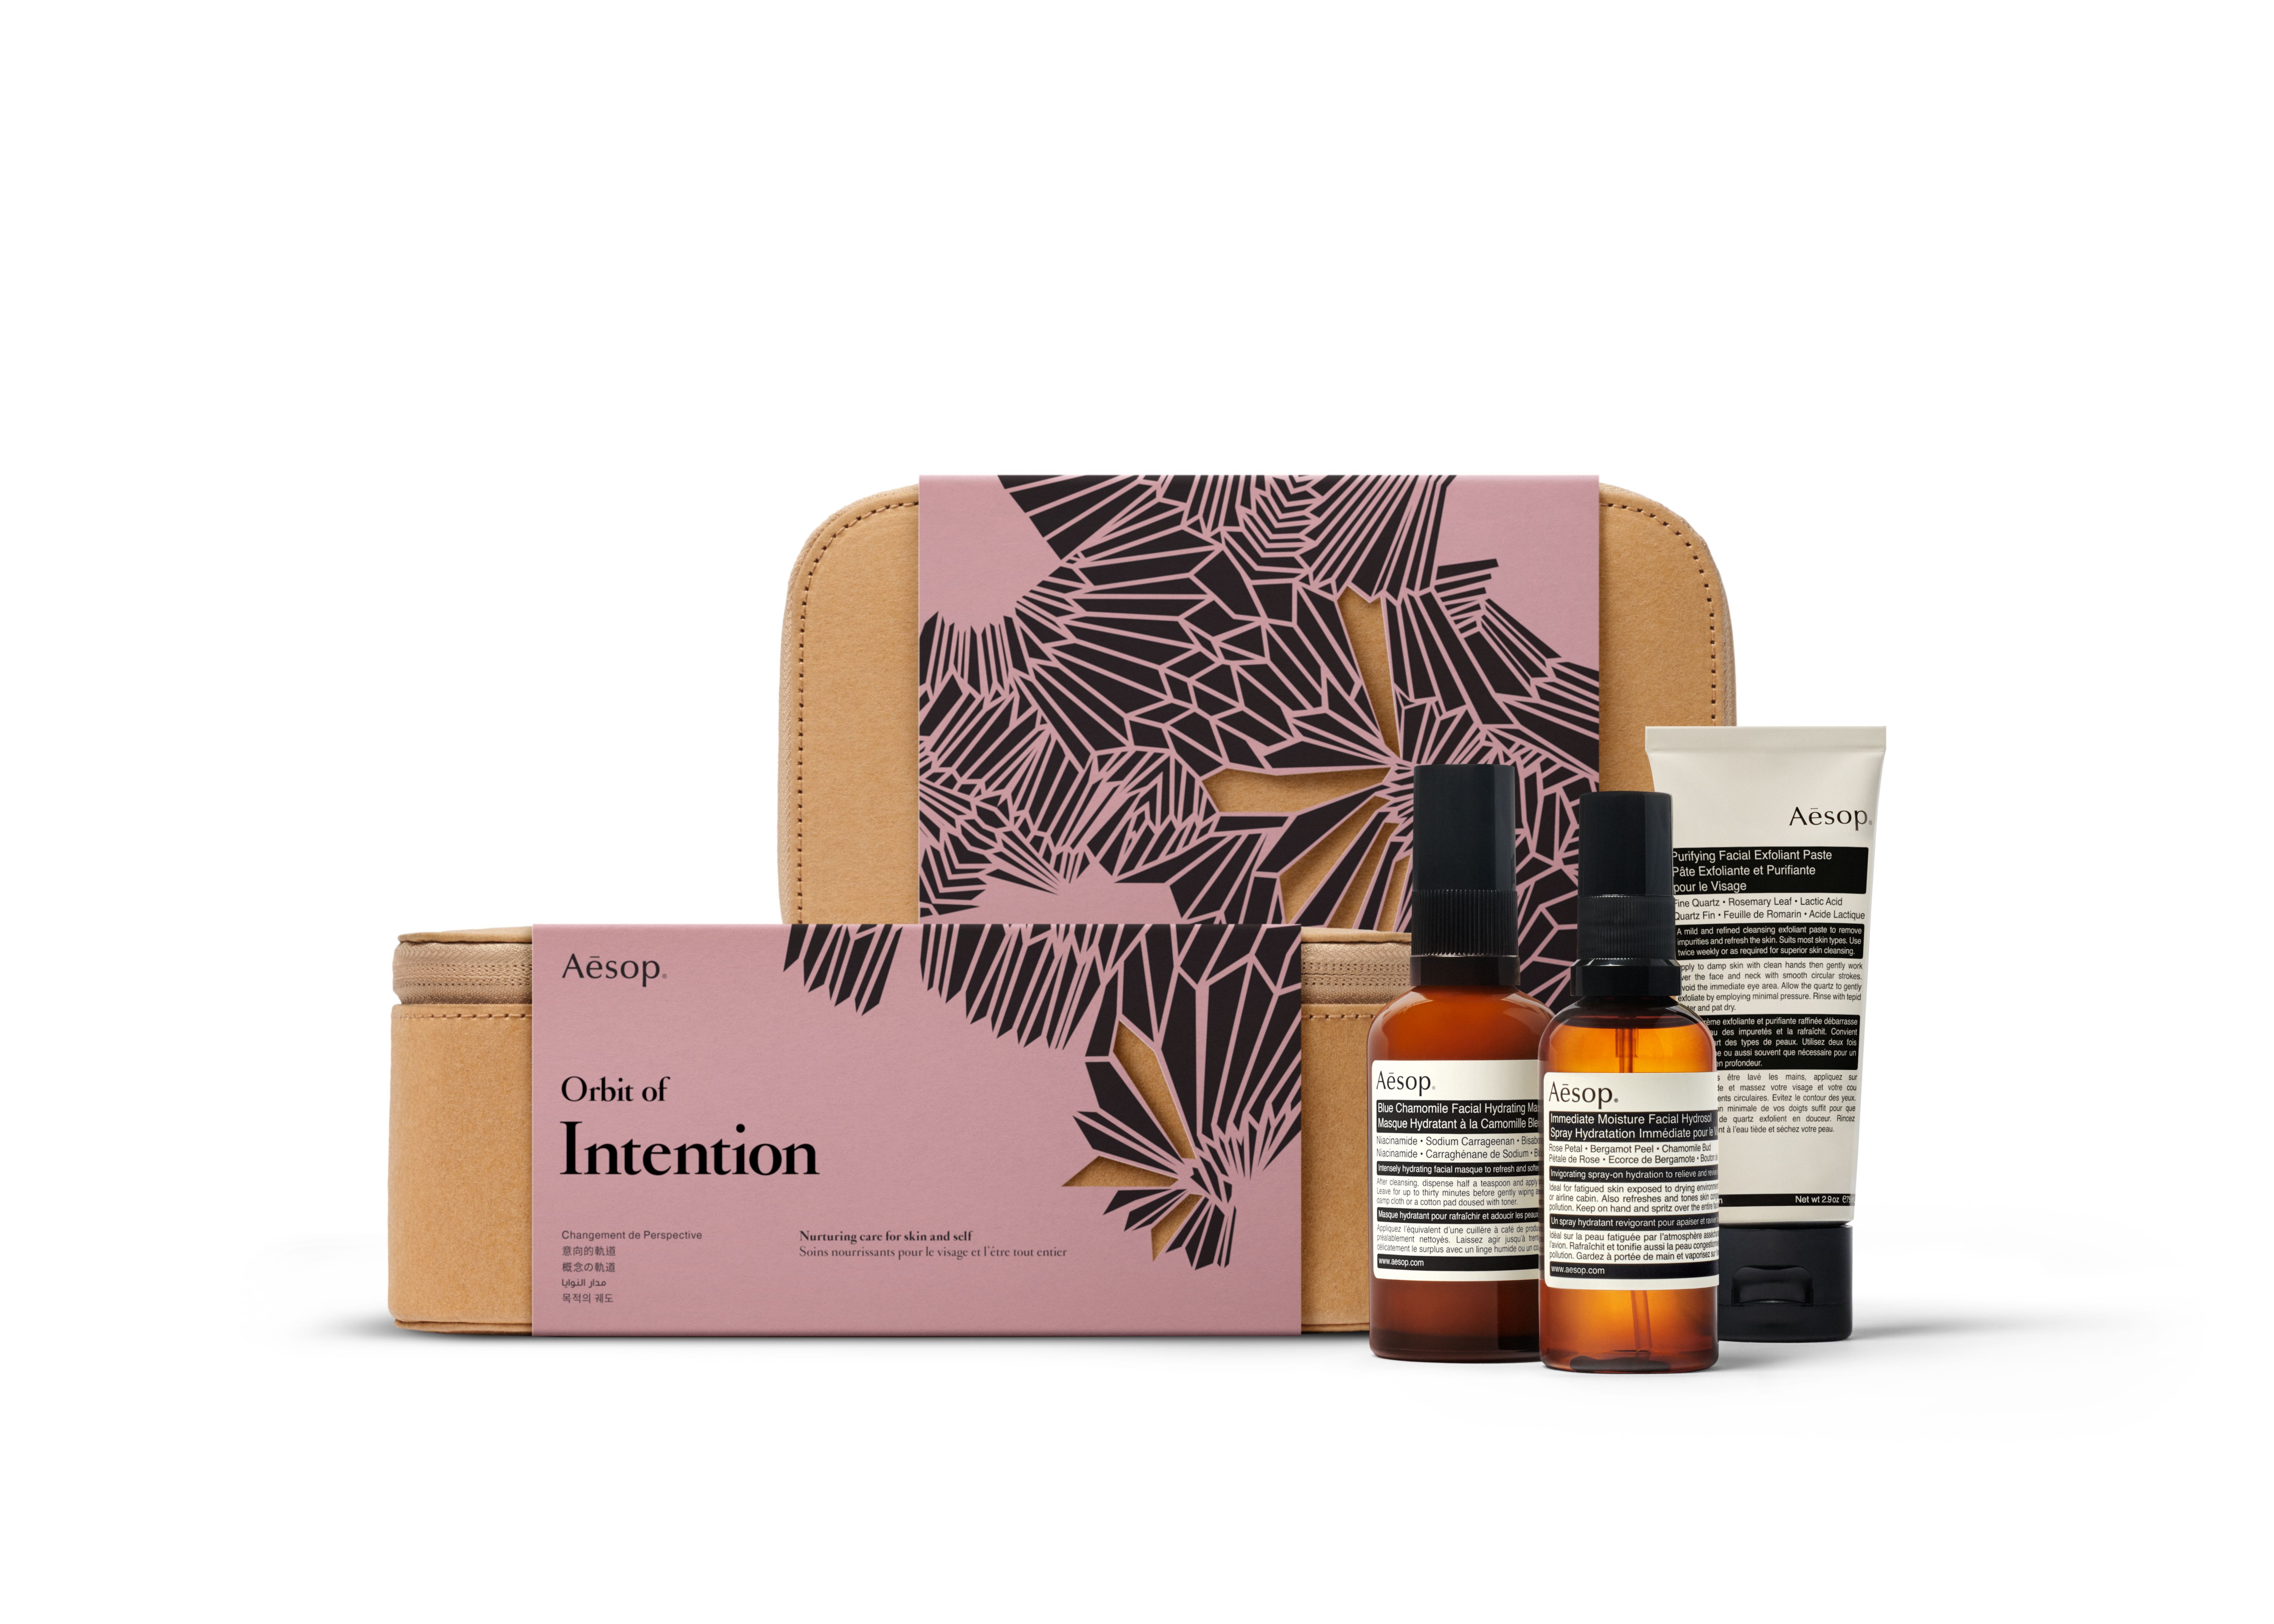 Large JPEG - Aesop Gift Kits 2018 - 19 Intention x 2 with Product